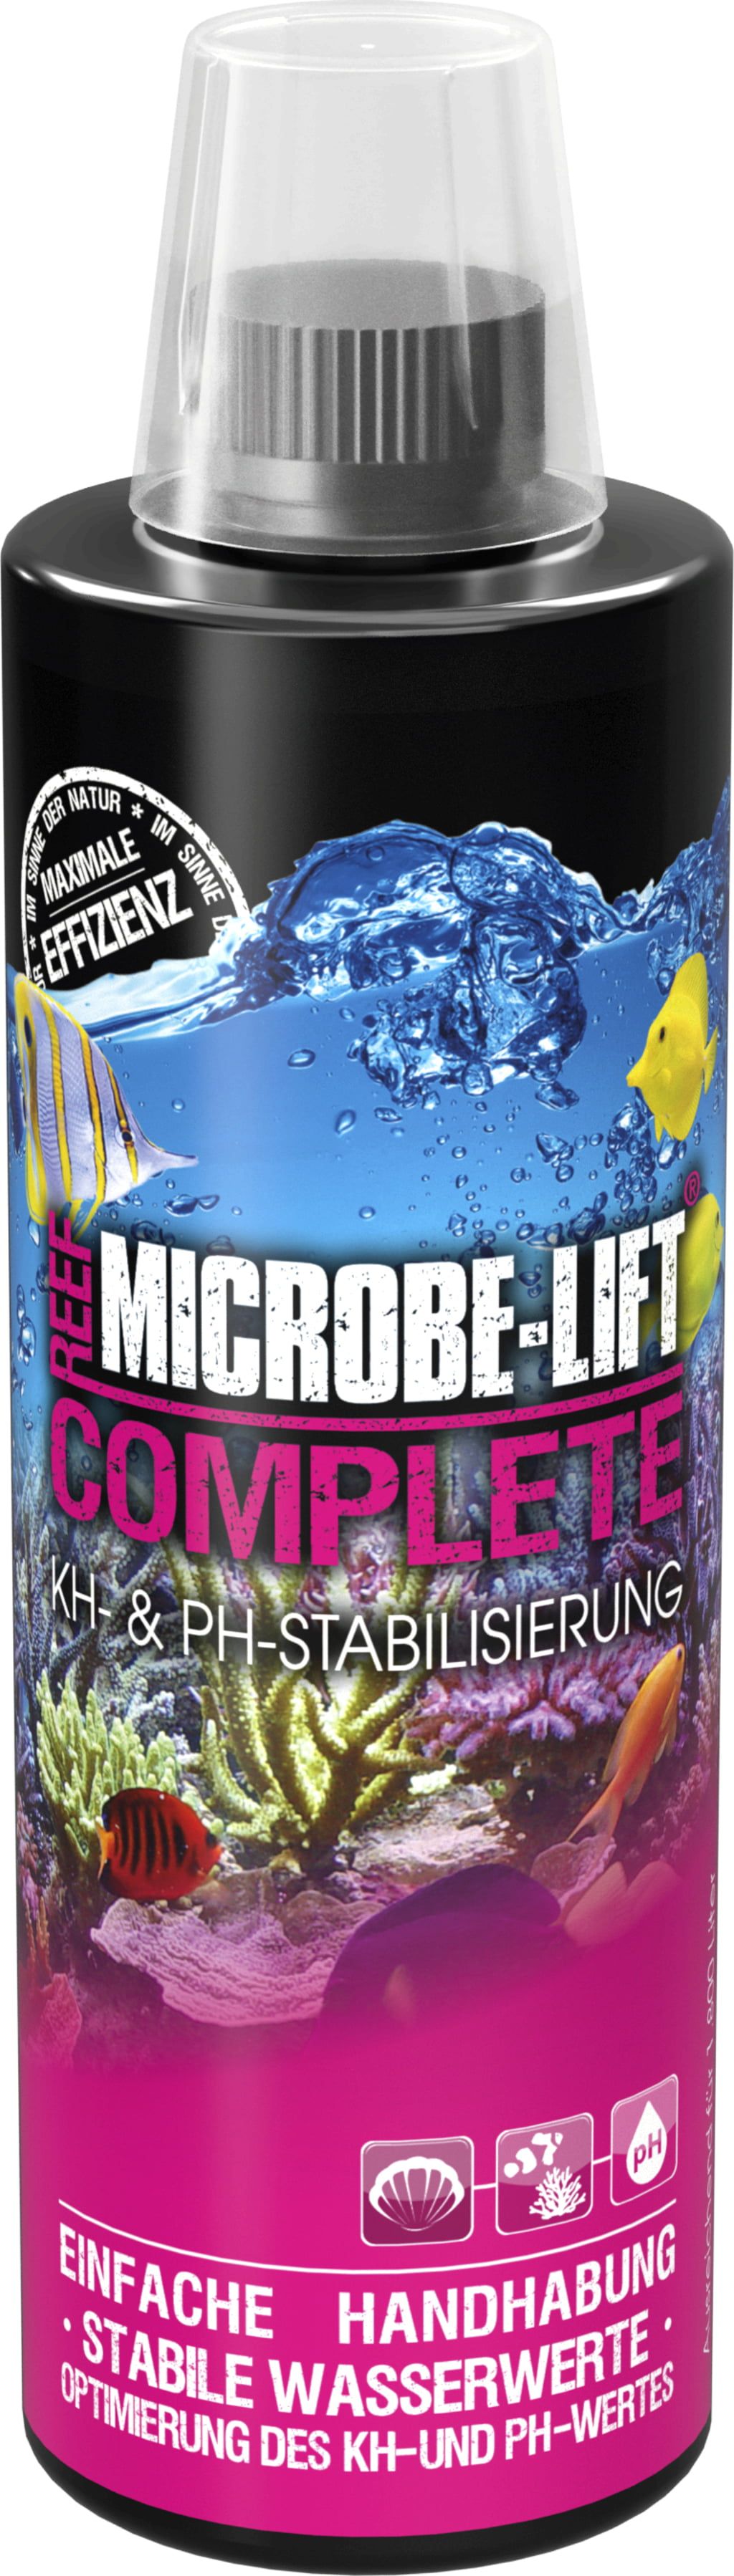 Microbe-Lift Complete